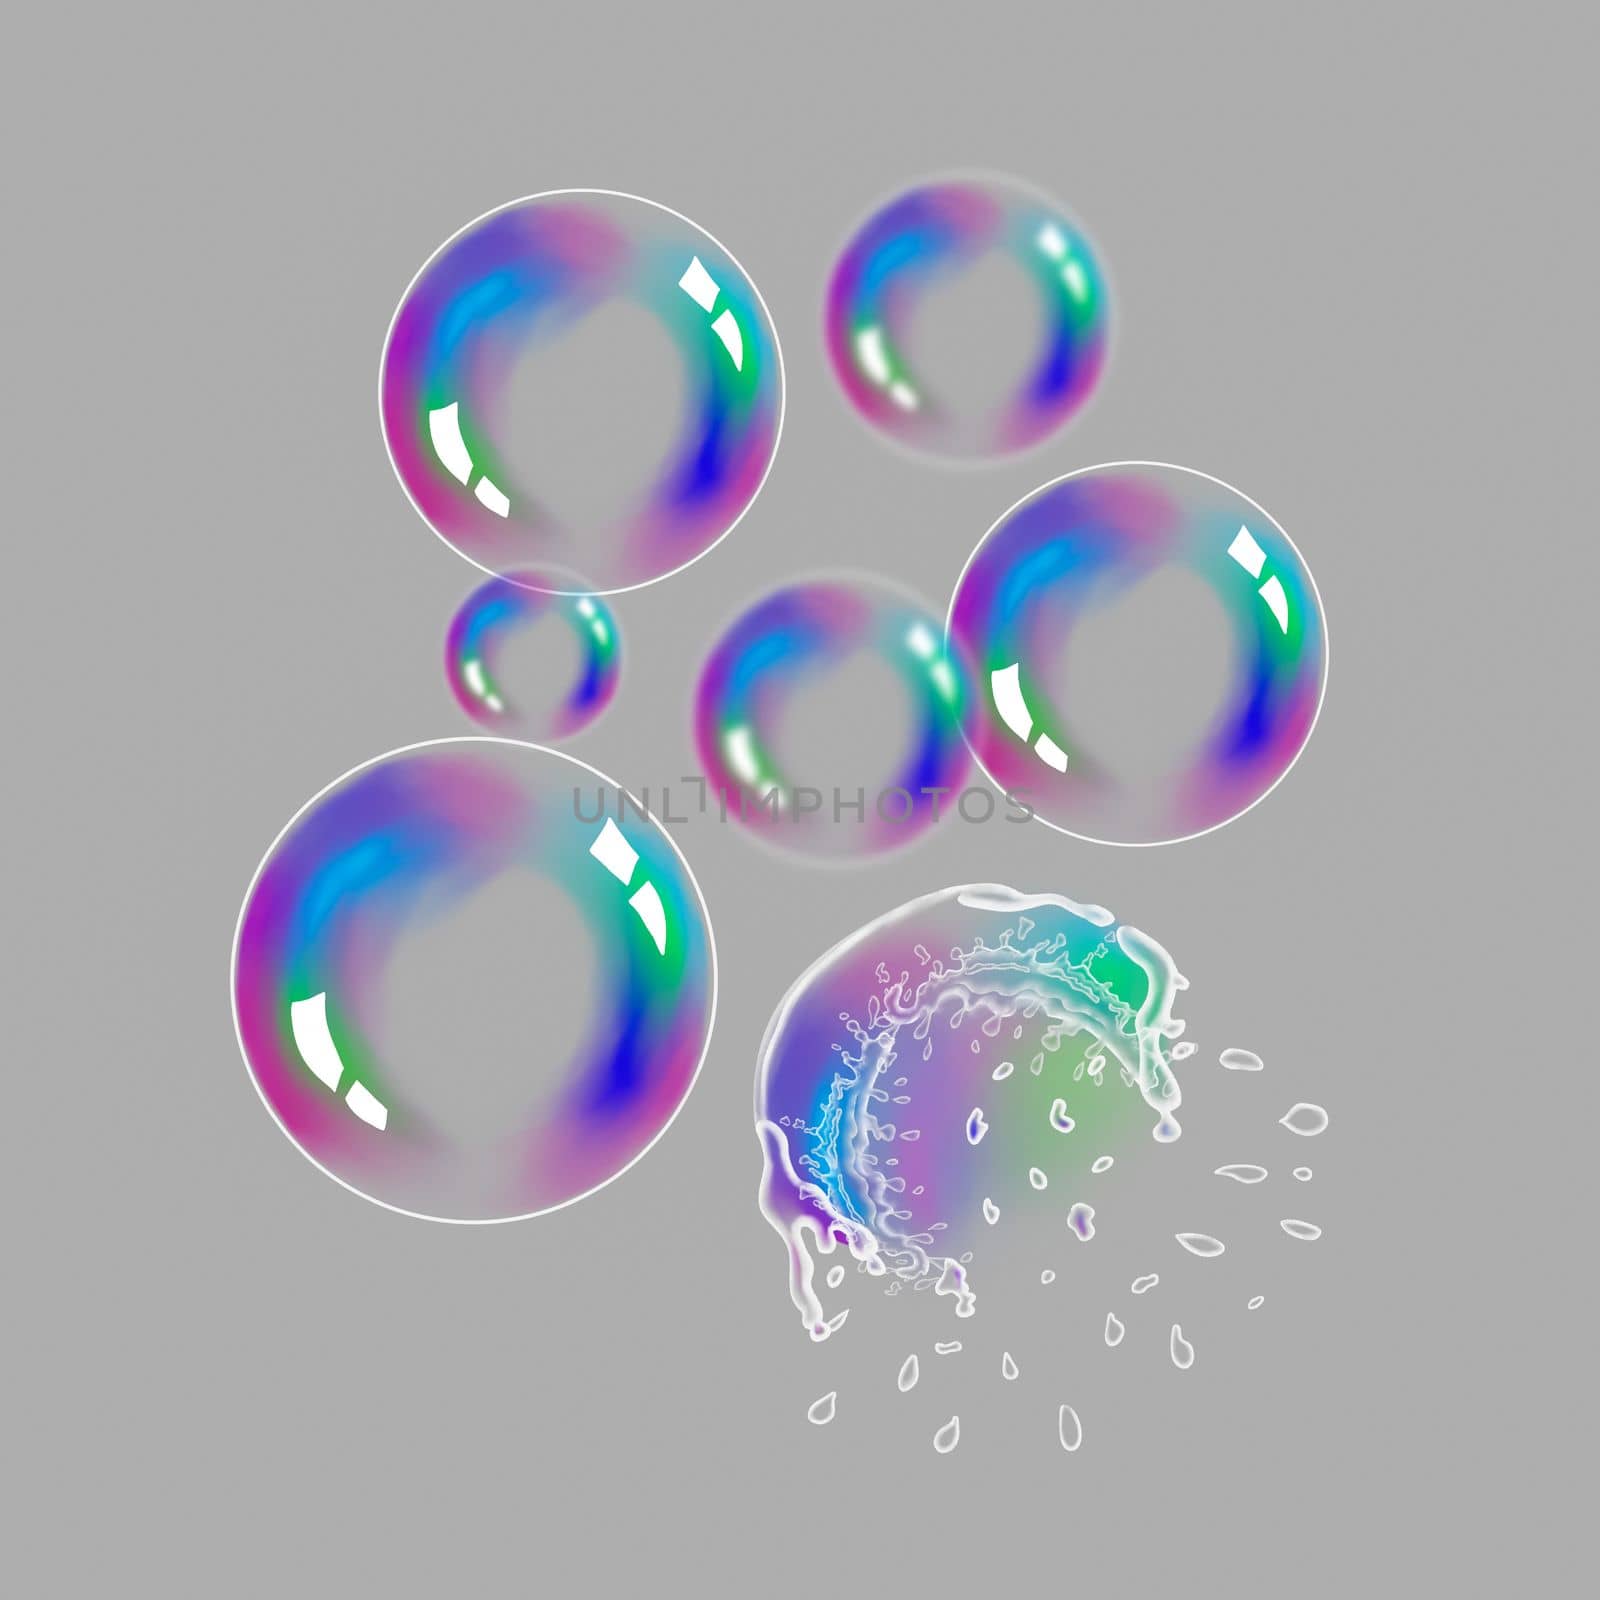 Soap bubbles are flying in the air on an isolated background. The soap bubble burst by Alina_Lebed